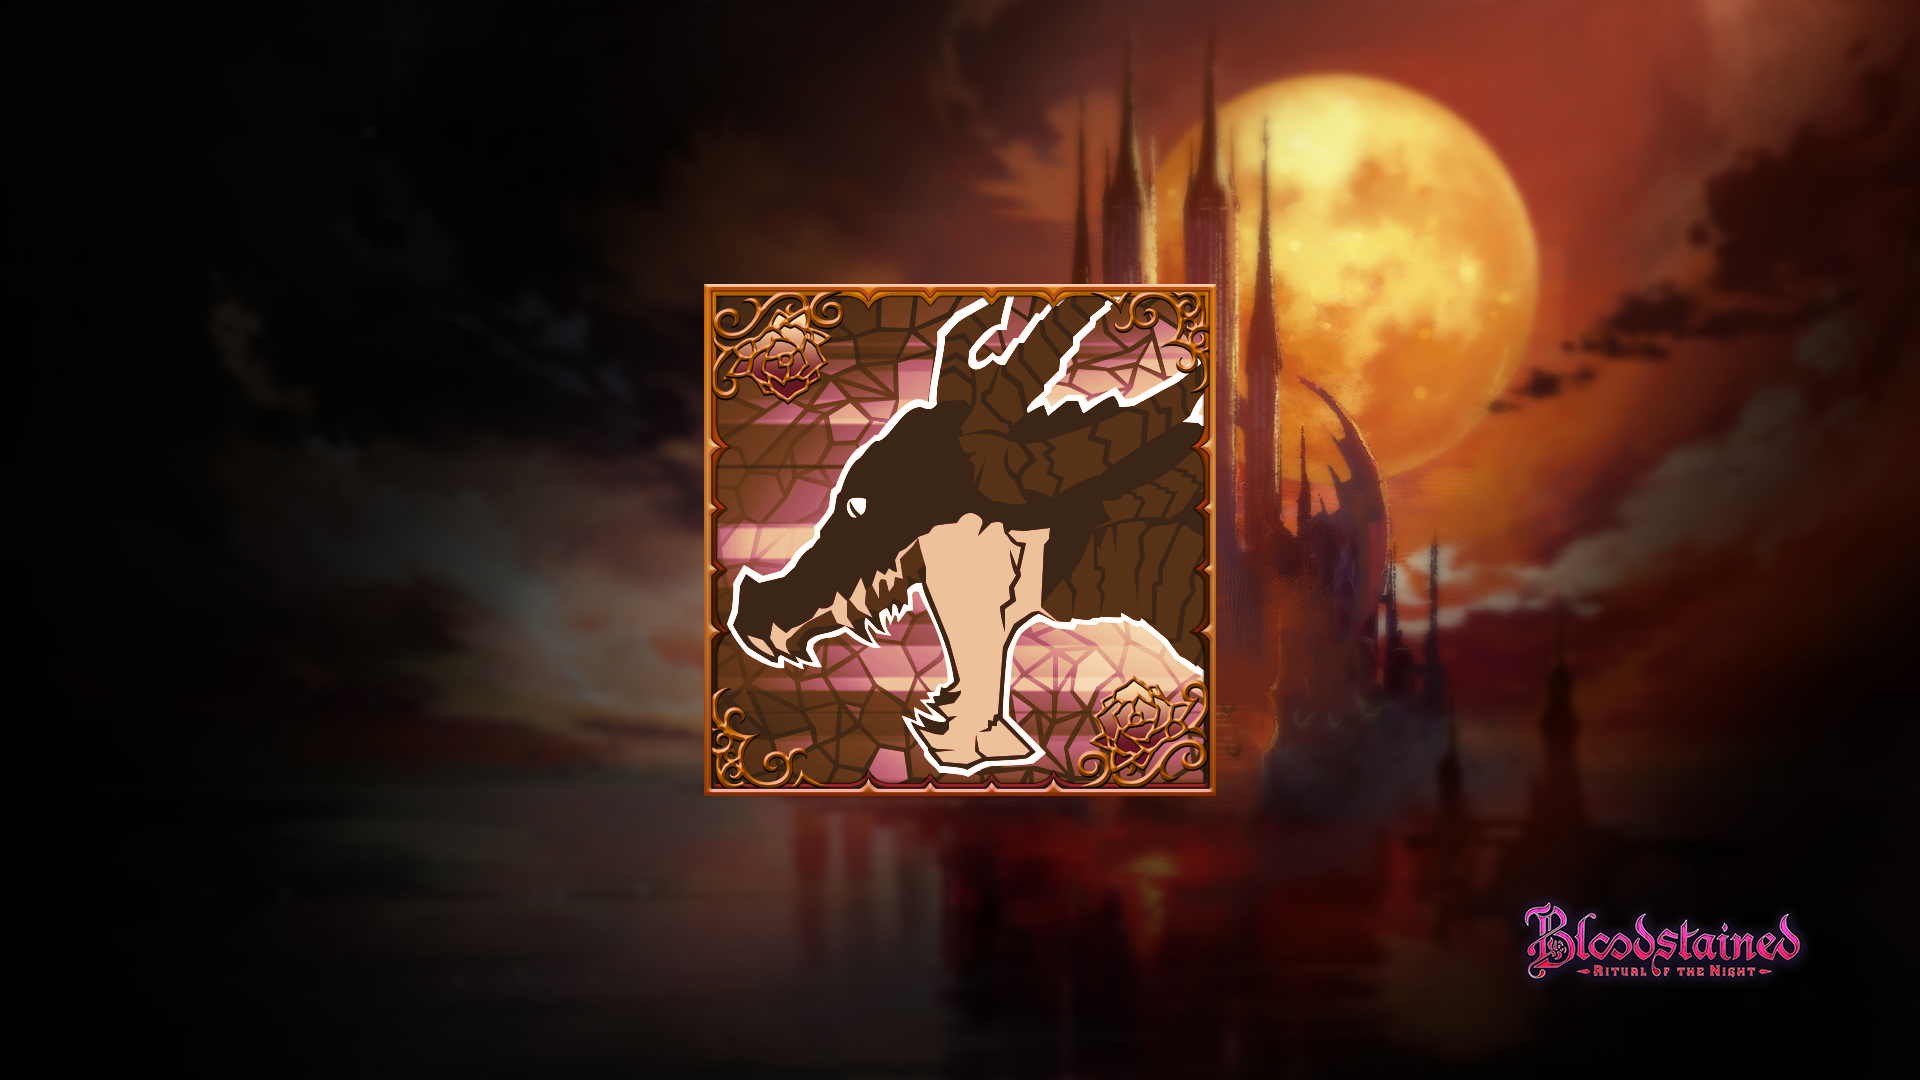 Icon for Dragonslayer